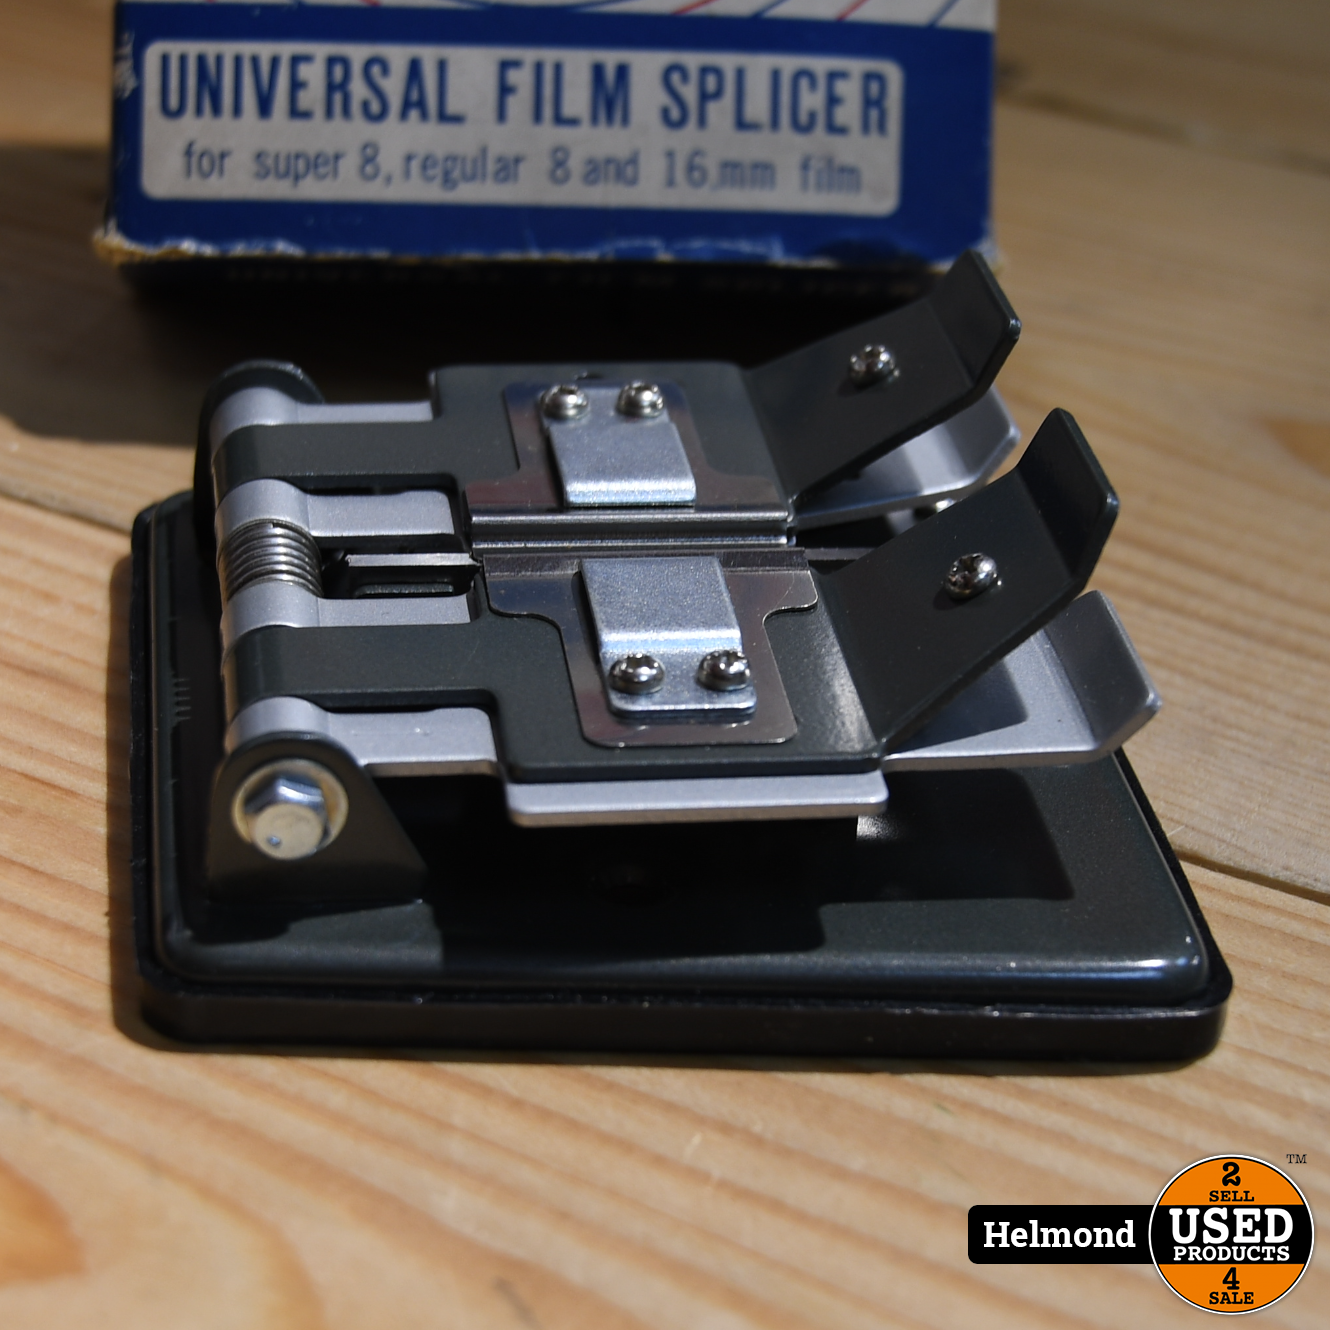 Universal Film Splicer for Super 8 Regular 16 mm - Used Products